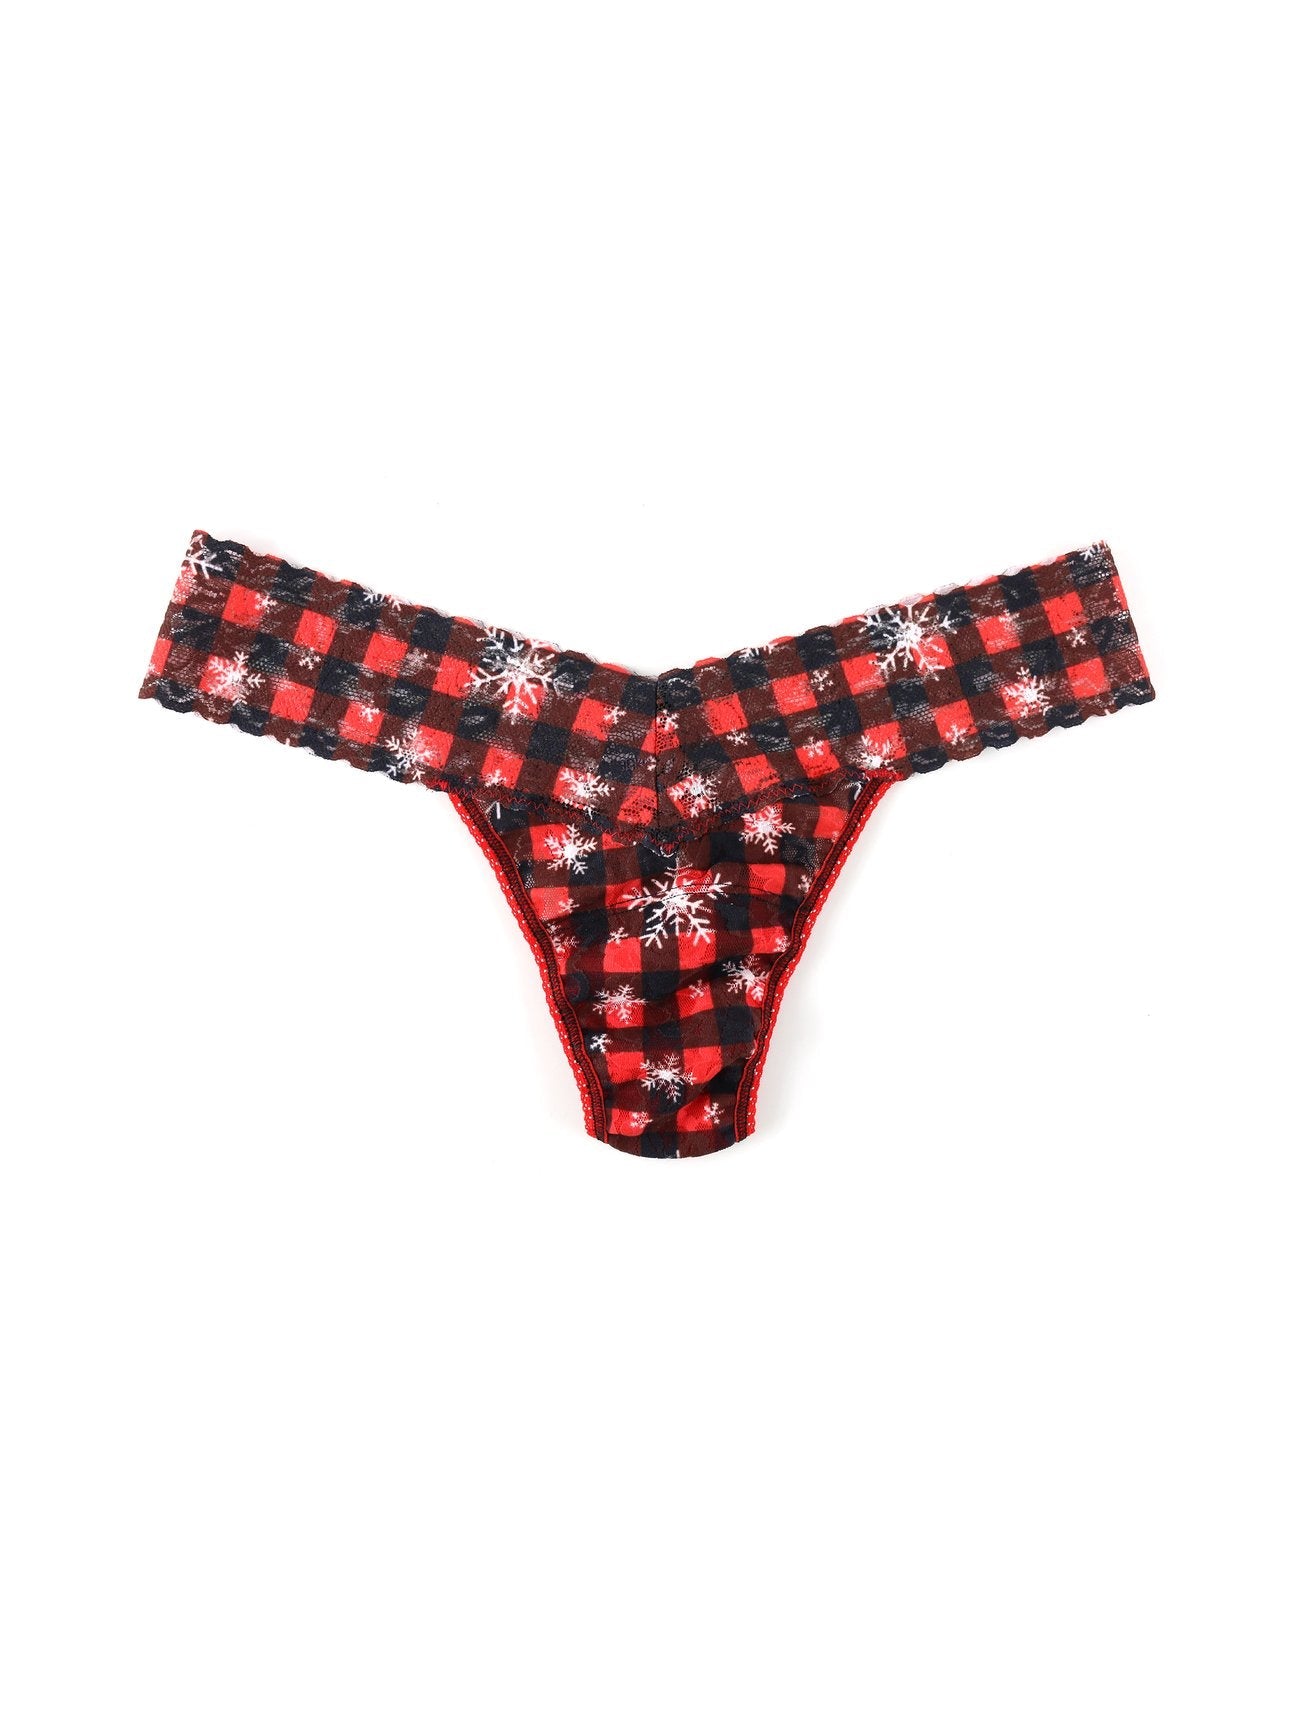 Hanky Panky Home for the Holidays Thong - My Filosophy